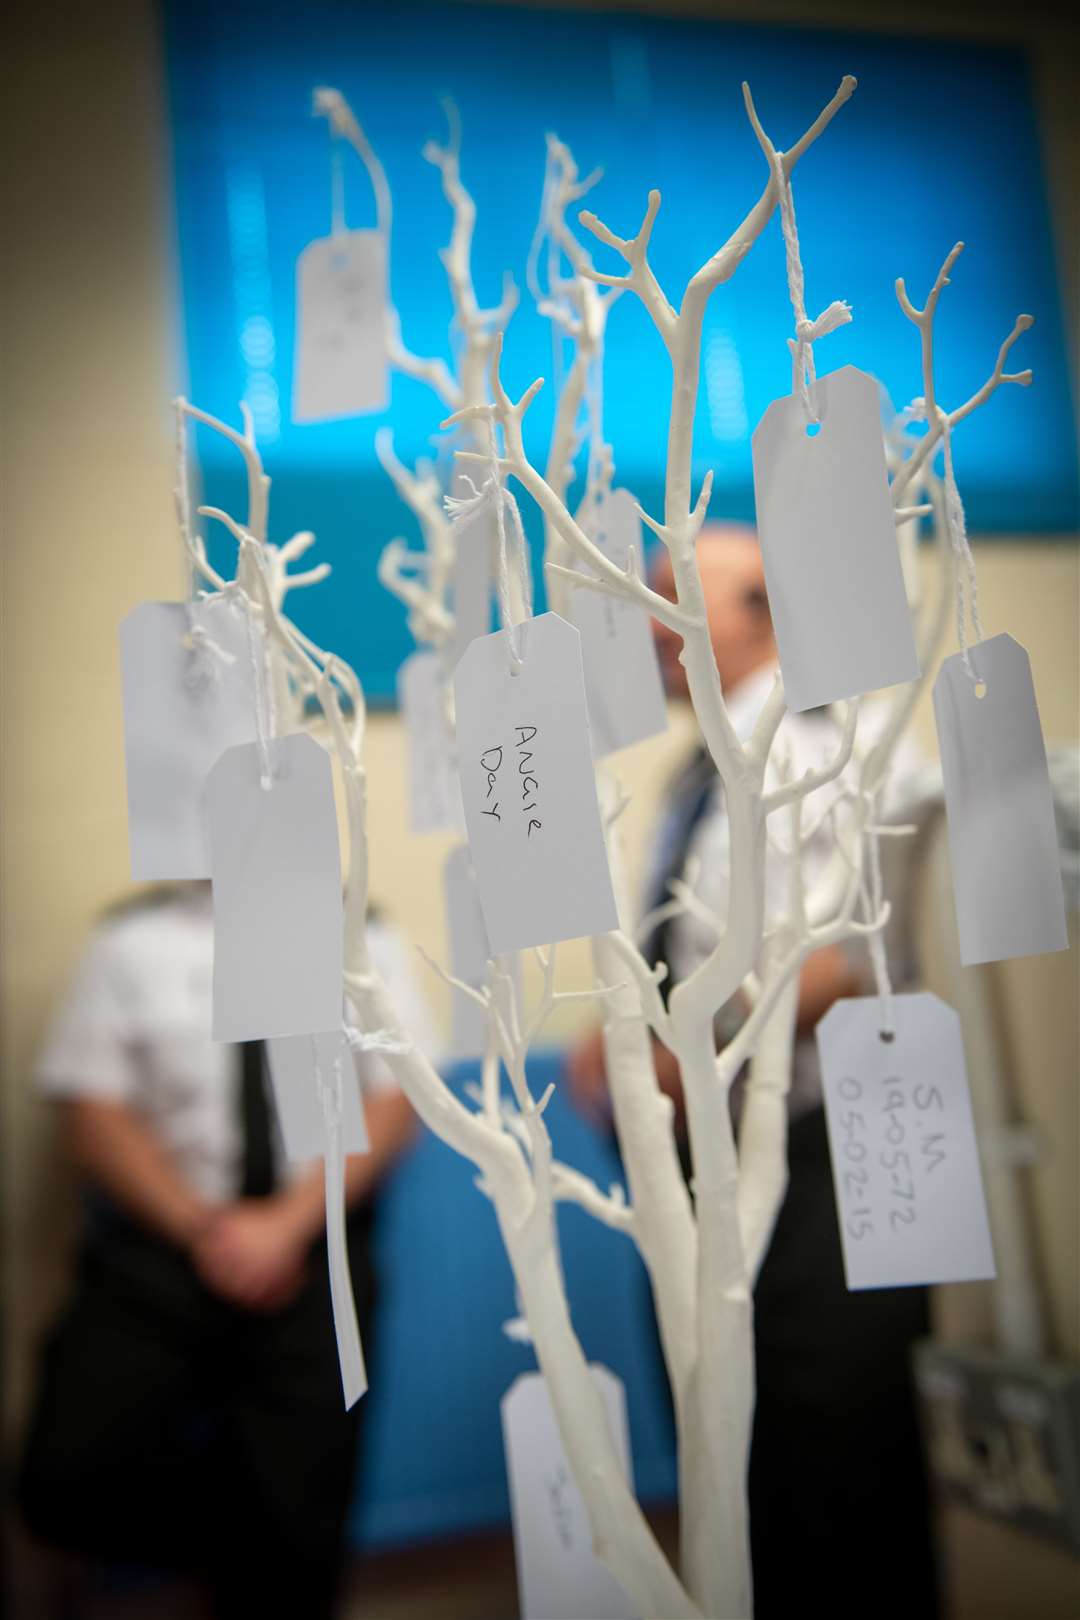 There was an opportunity to put the names of loved ones lost to addiction on the remembrance tree. Picture: Callum Mackay